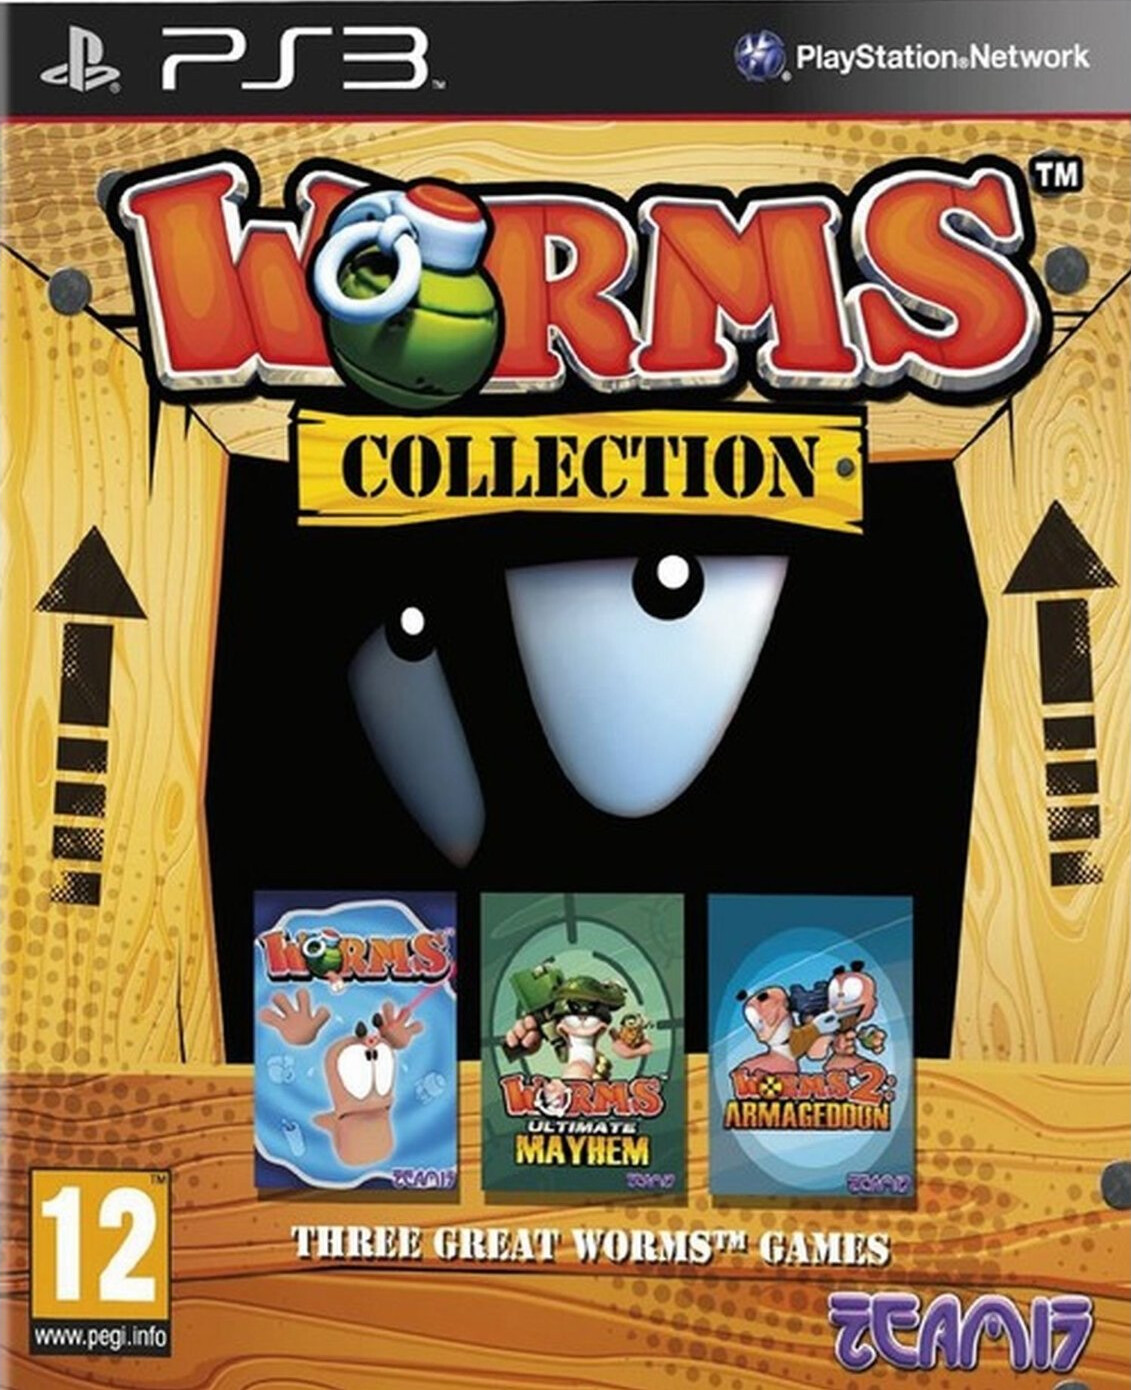 download worms ps3 collection for free